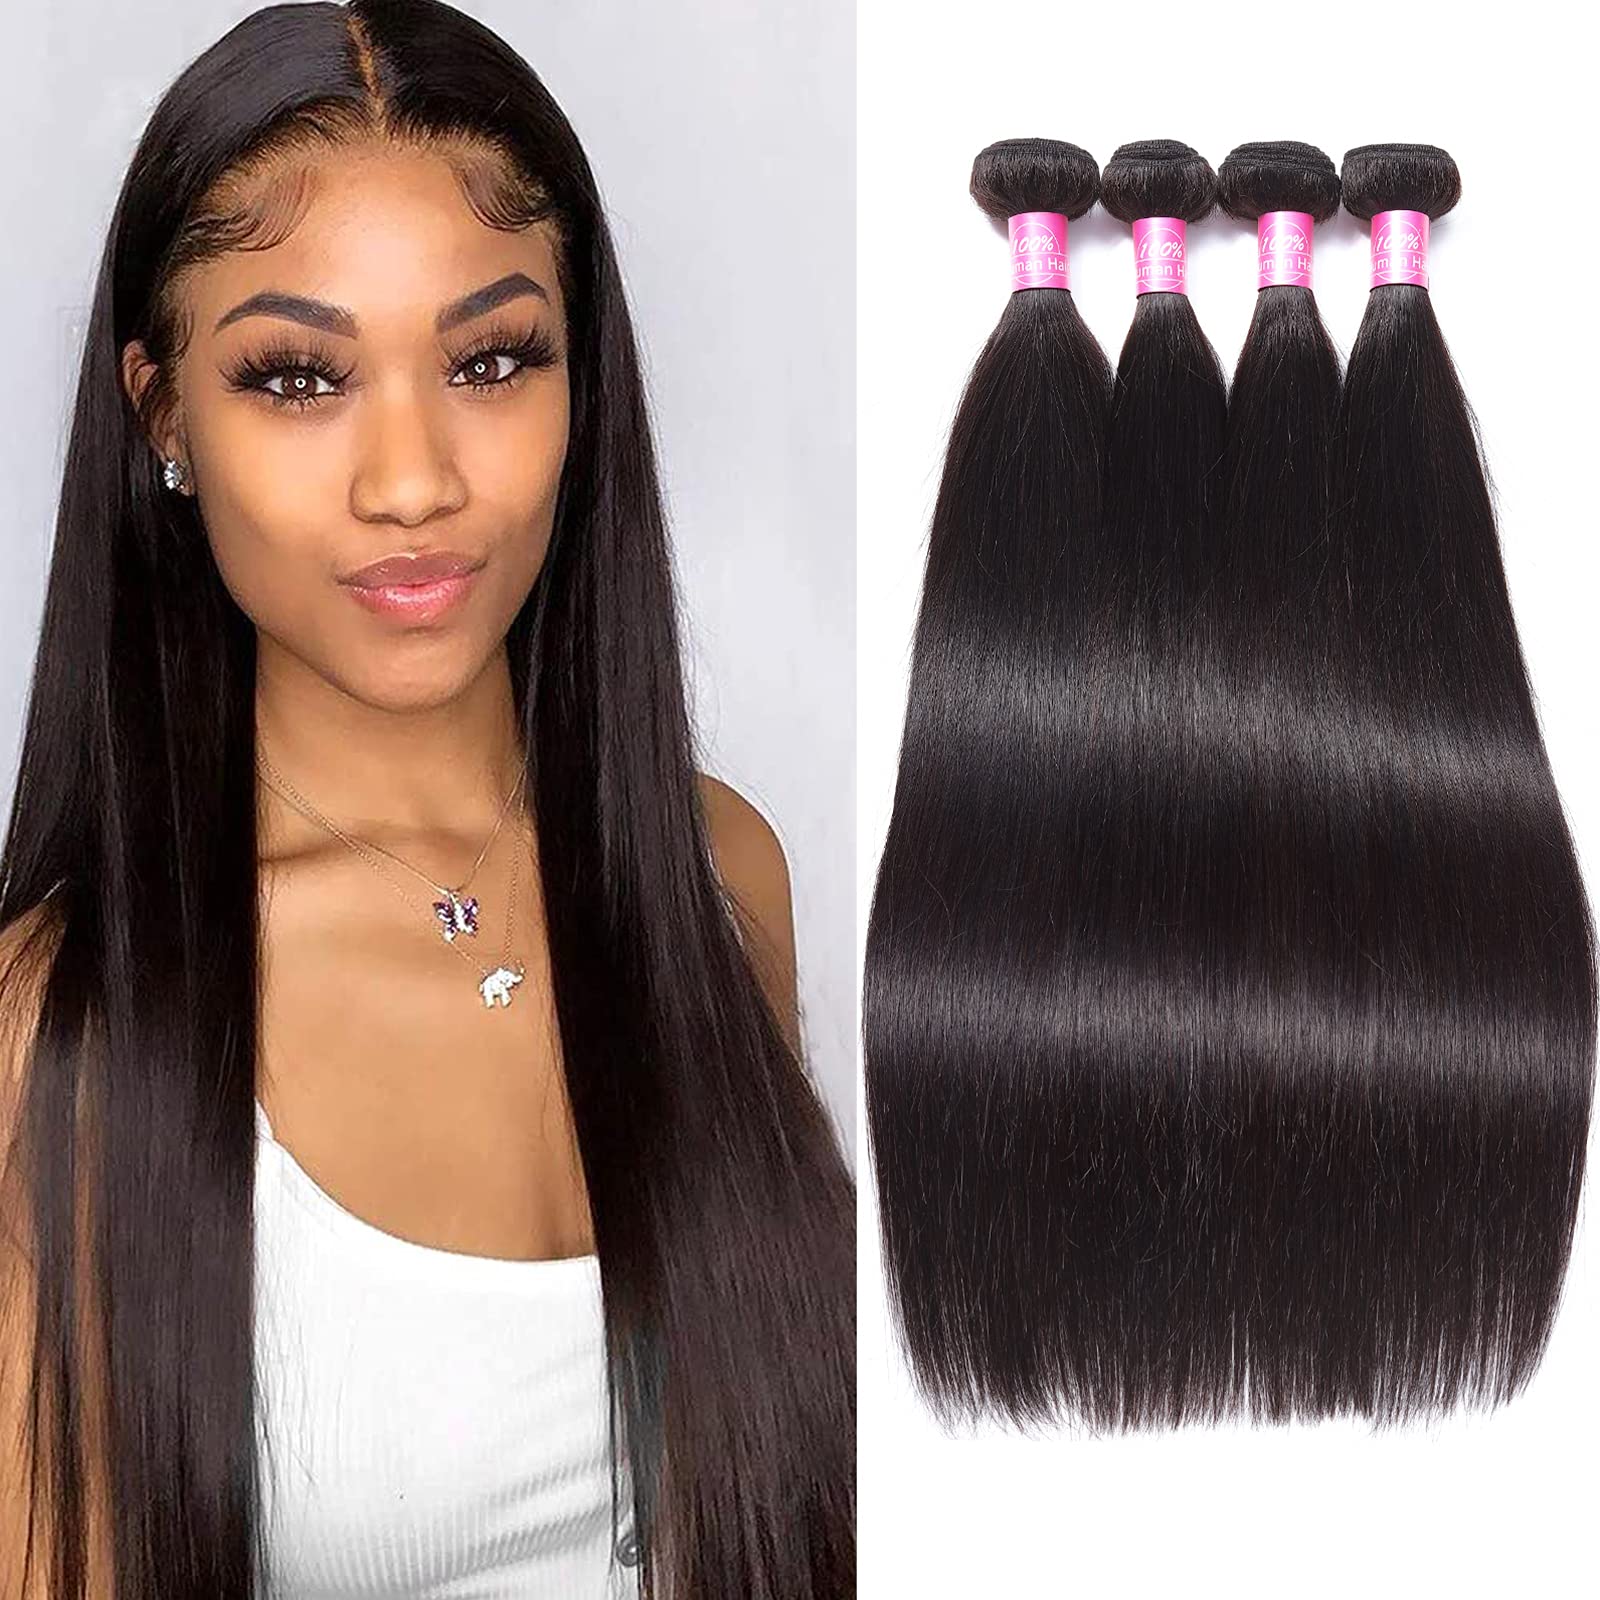 Hair Extensions Made From Brazilian Remy Hair